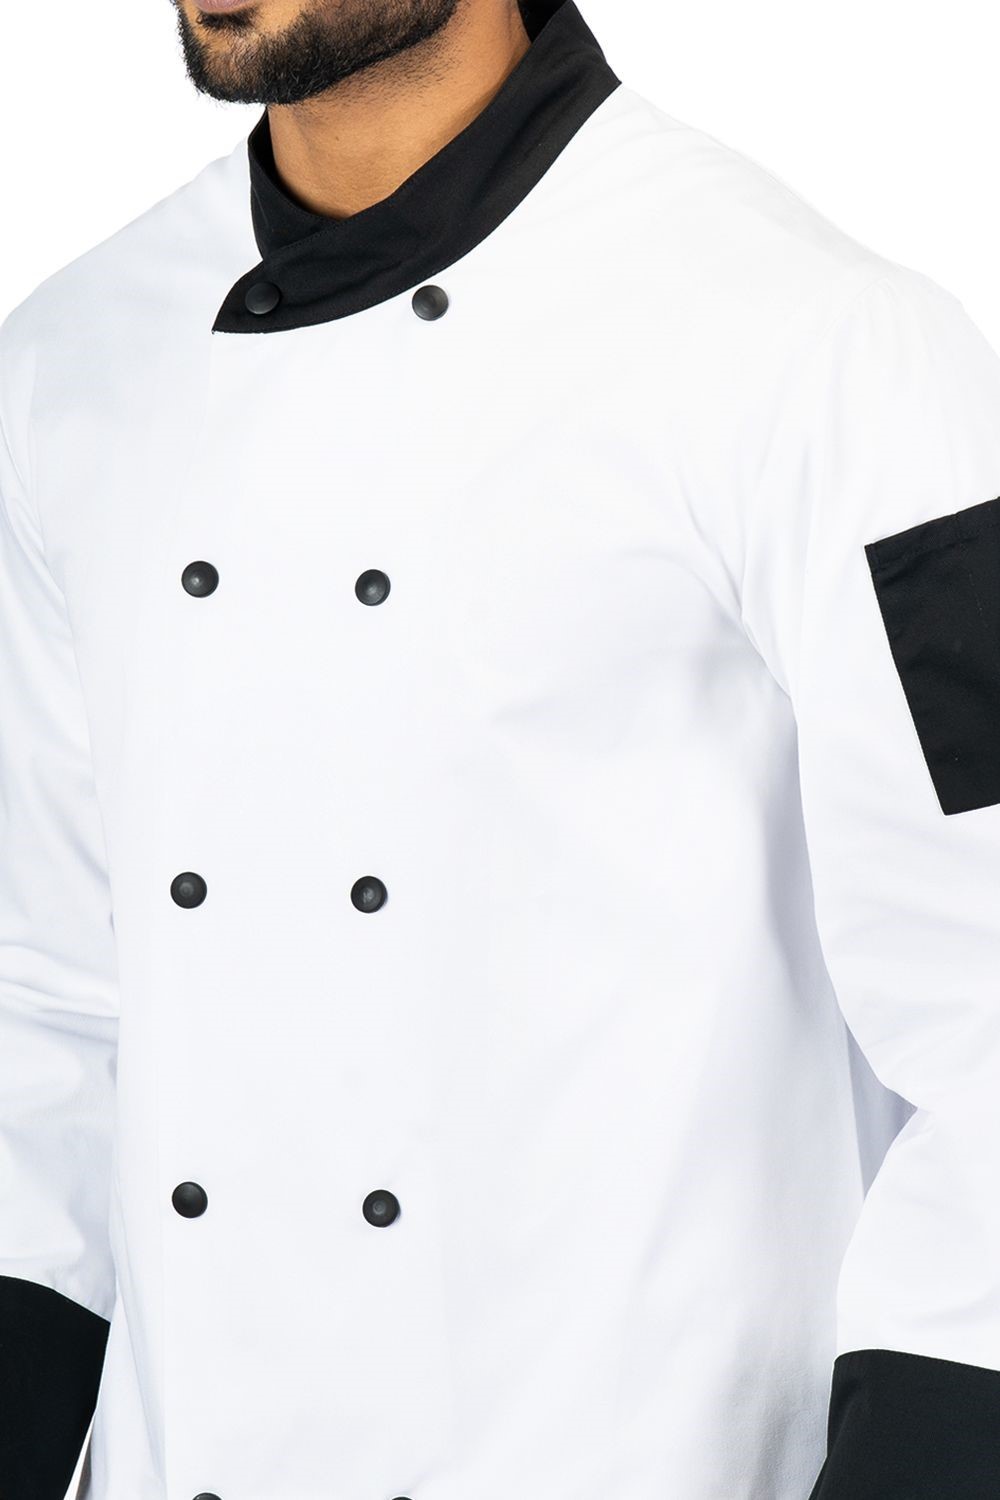 White Chef Coat made of high-quality, soft and comfortable cotton blend fabric which makes you feel more lightweight and comfortable.